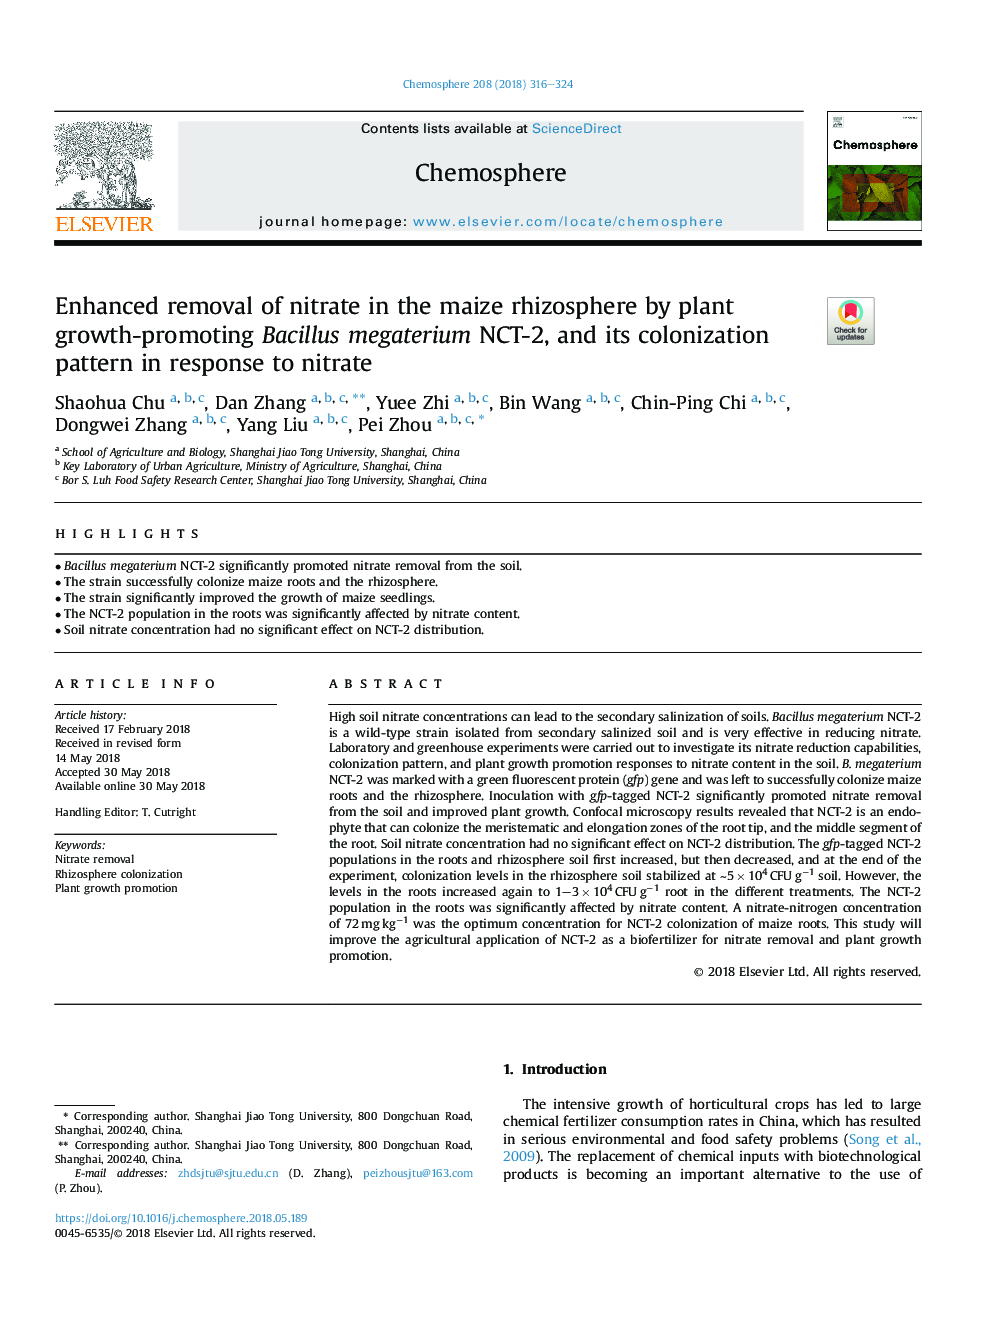 Enhanced removal of nitrate in the maize rhizosphere by plant growth-promoting Bacillus megaterium NCT-2, and its colonization pattern in response to nitrate